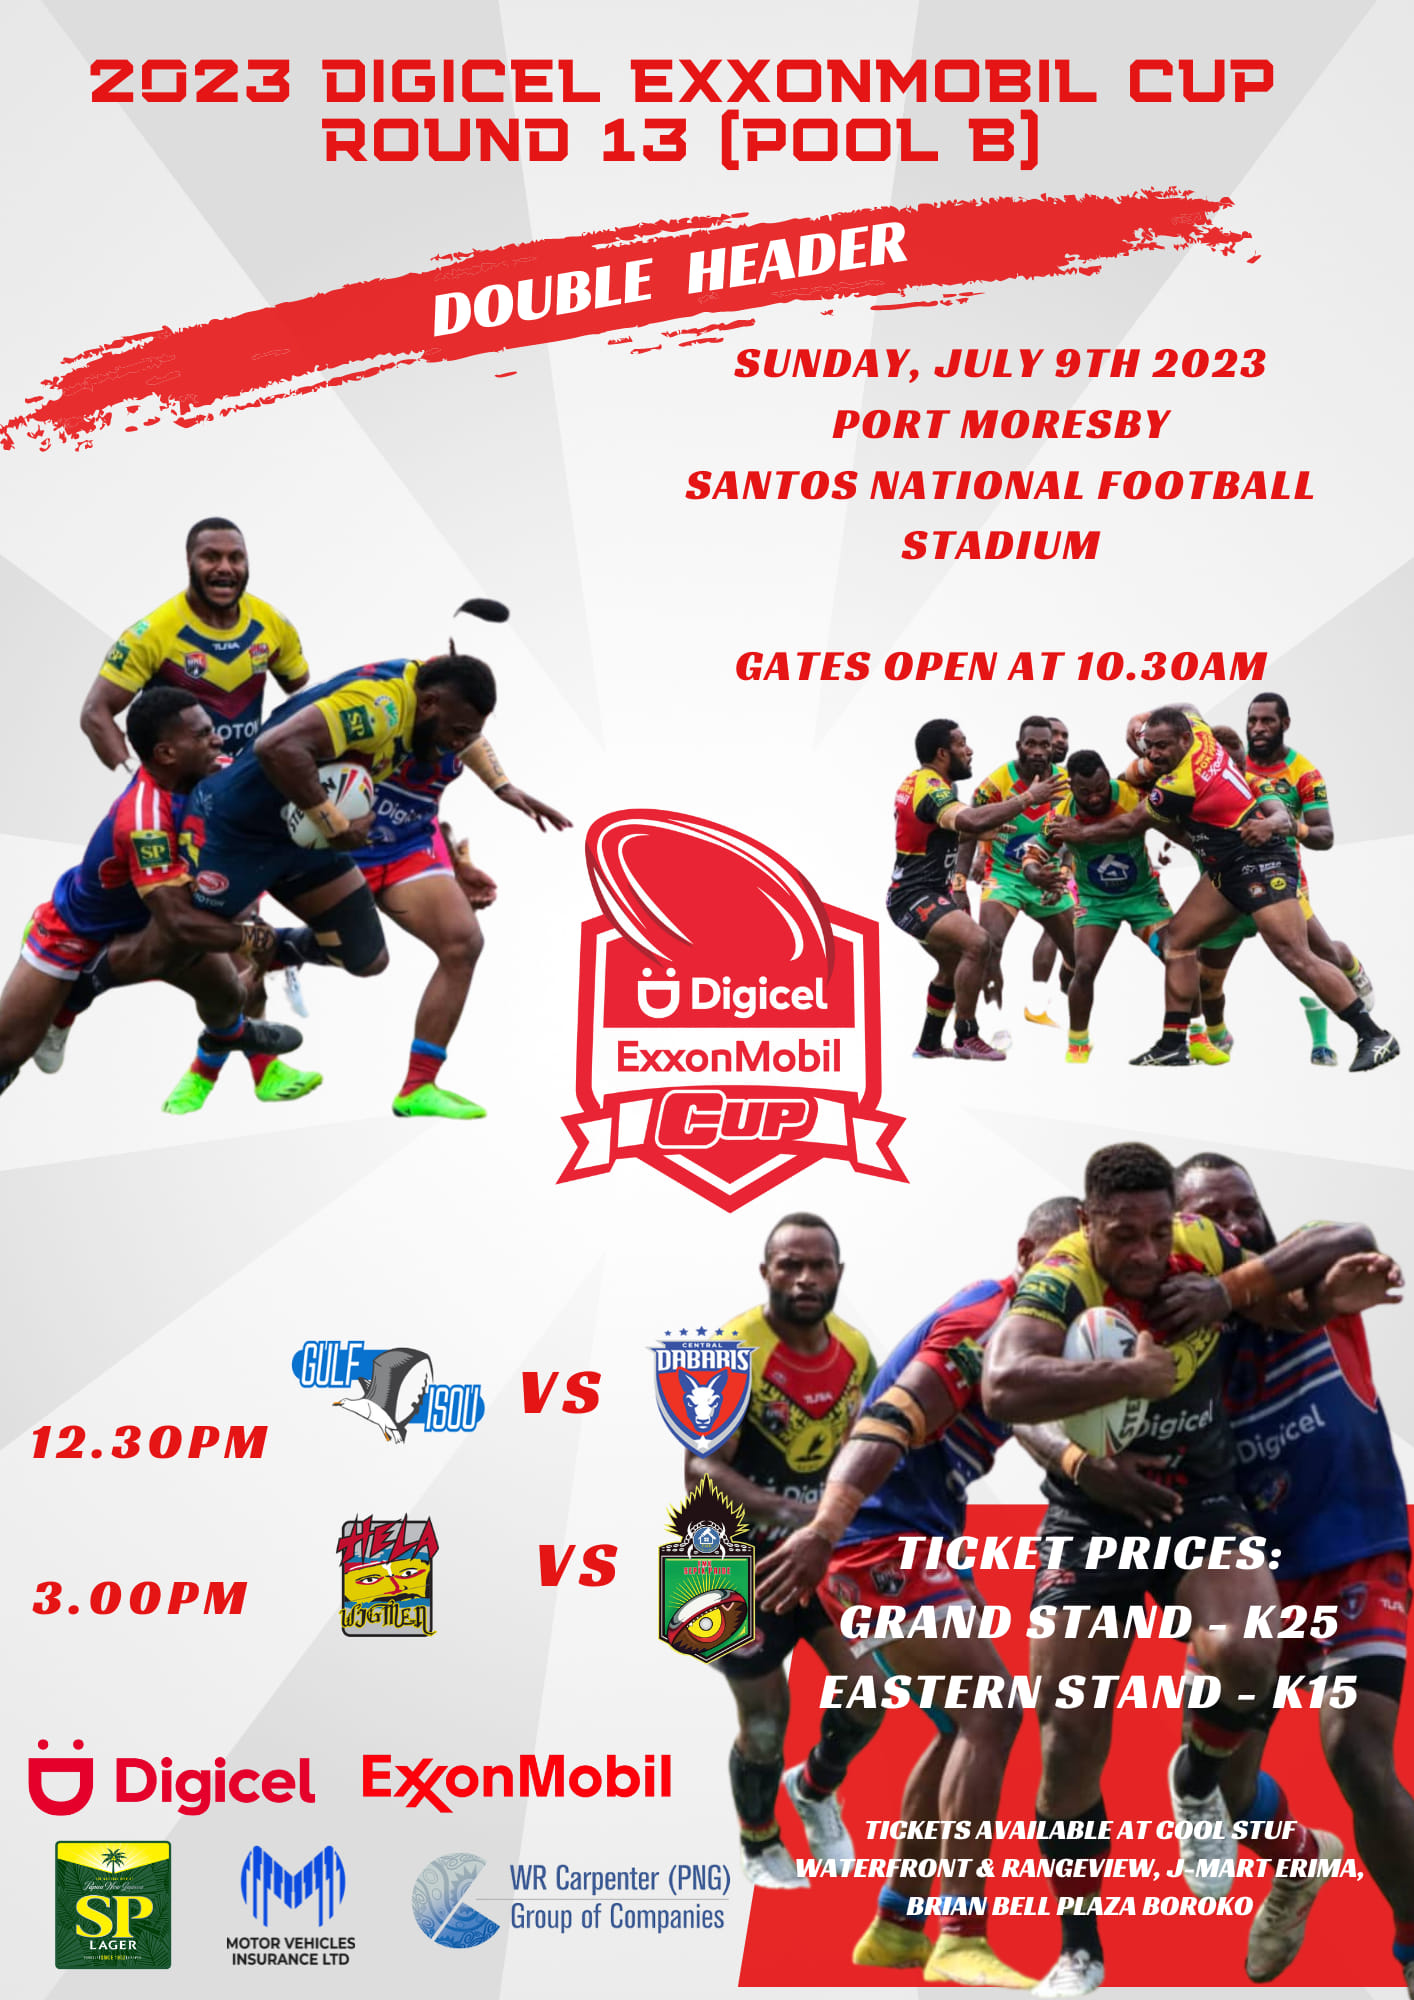 After Round 12 of the 2023 Digicel ExxonMobil Cup, here are the results and  points ladders for Pool A and Pool B. - PNG NRL